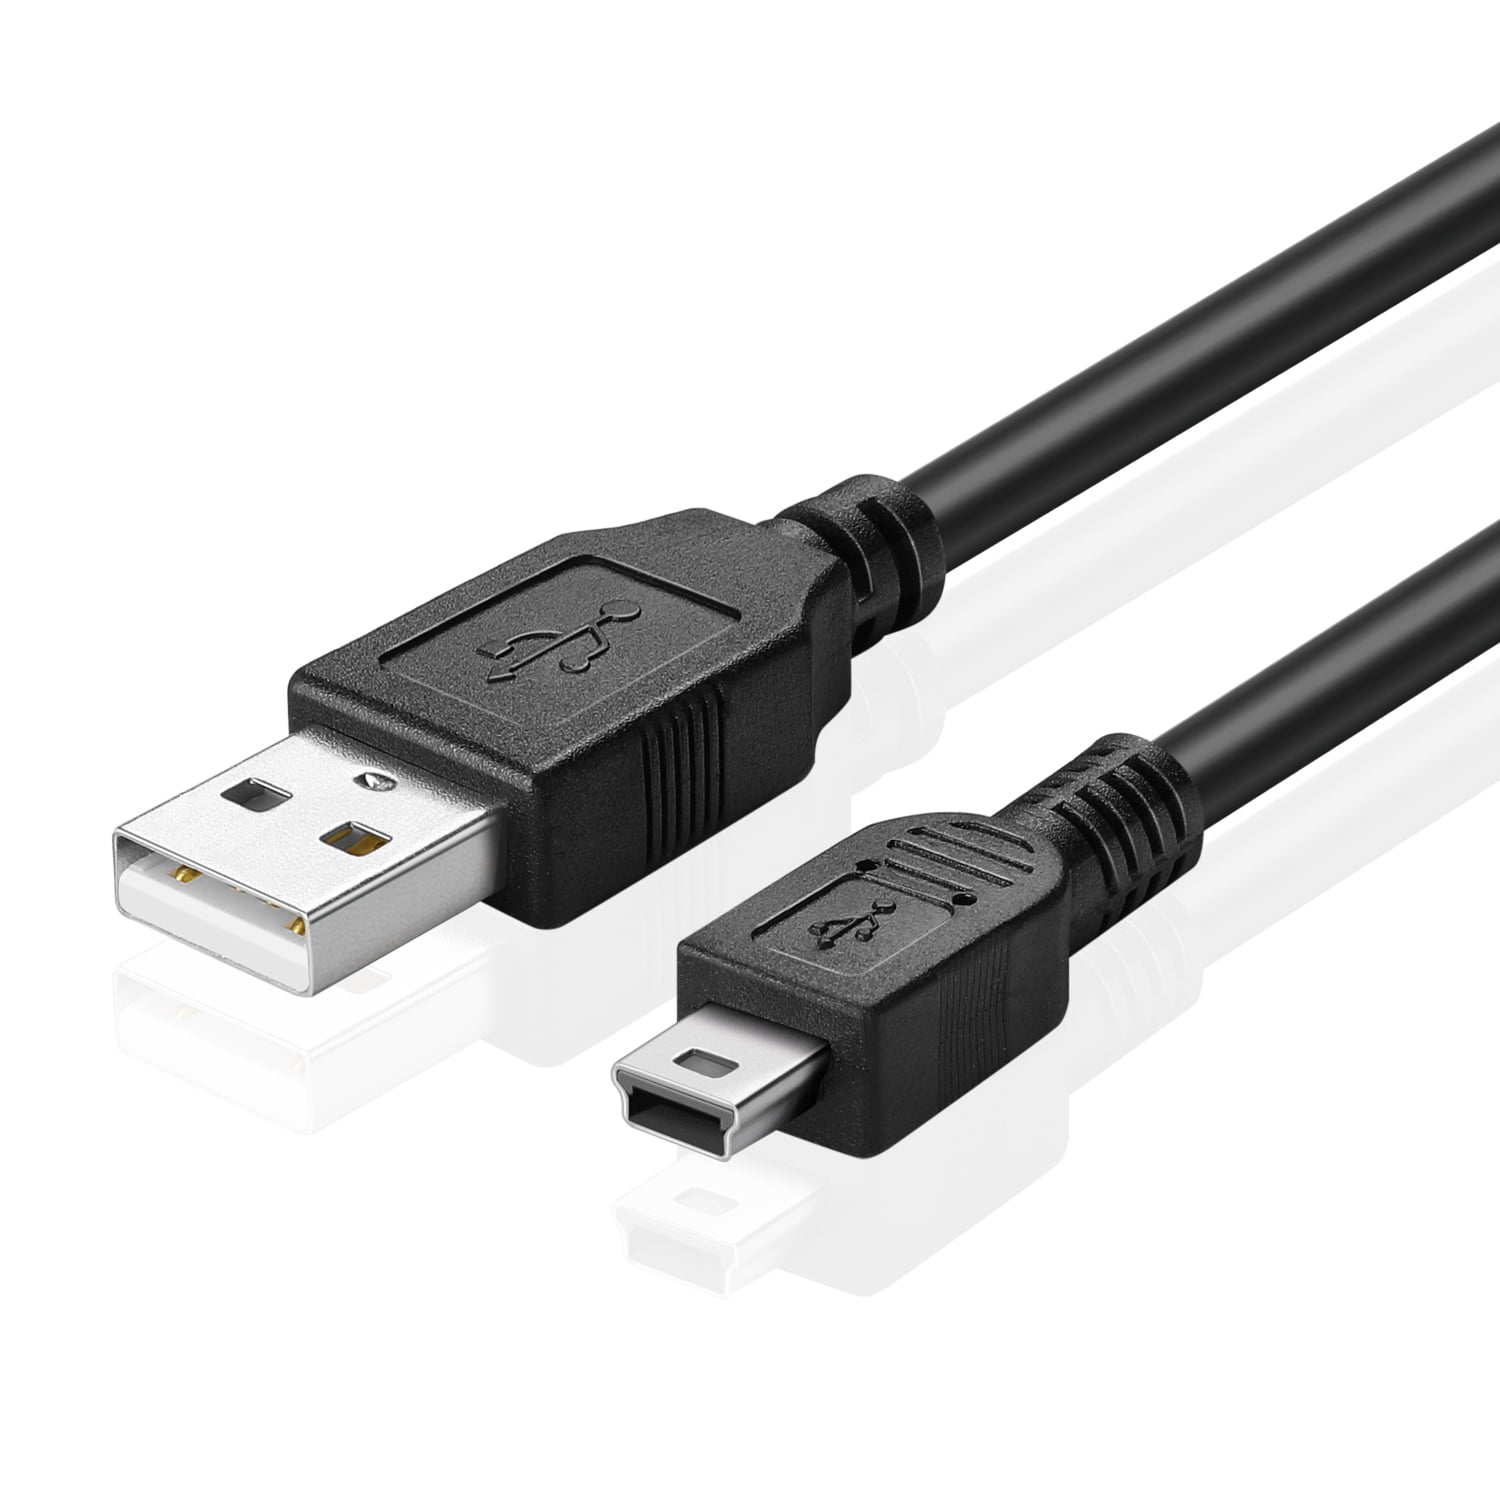 GOWOS 15Ft A-Male to Mini 5Pin Male USB2.0 Cable 